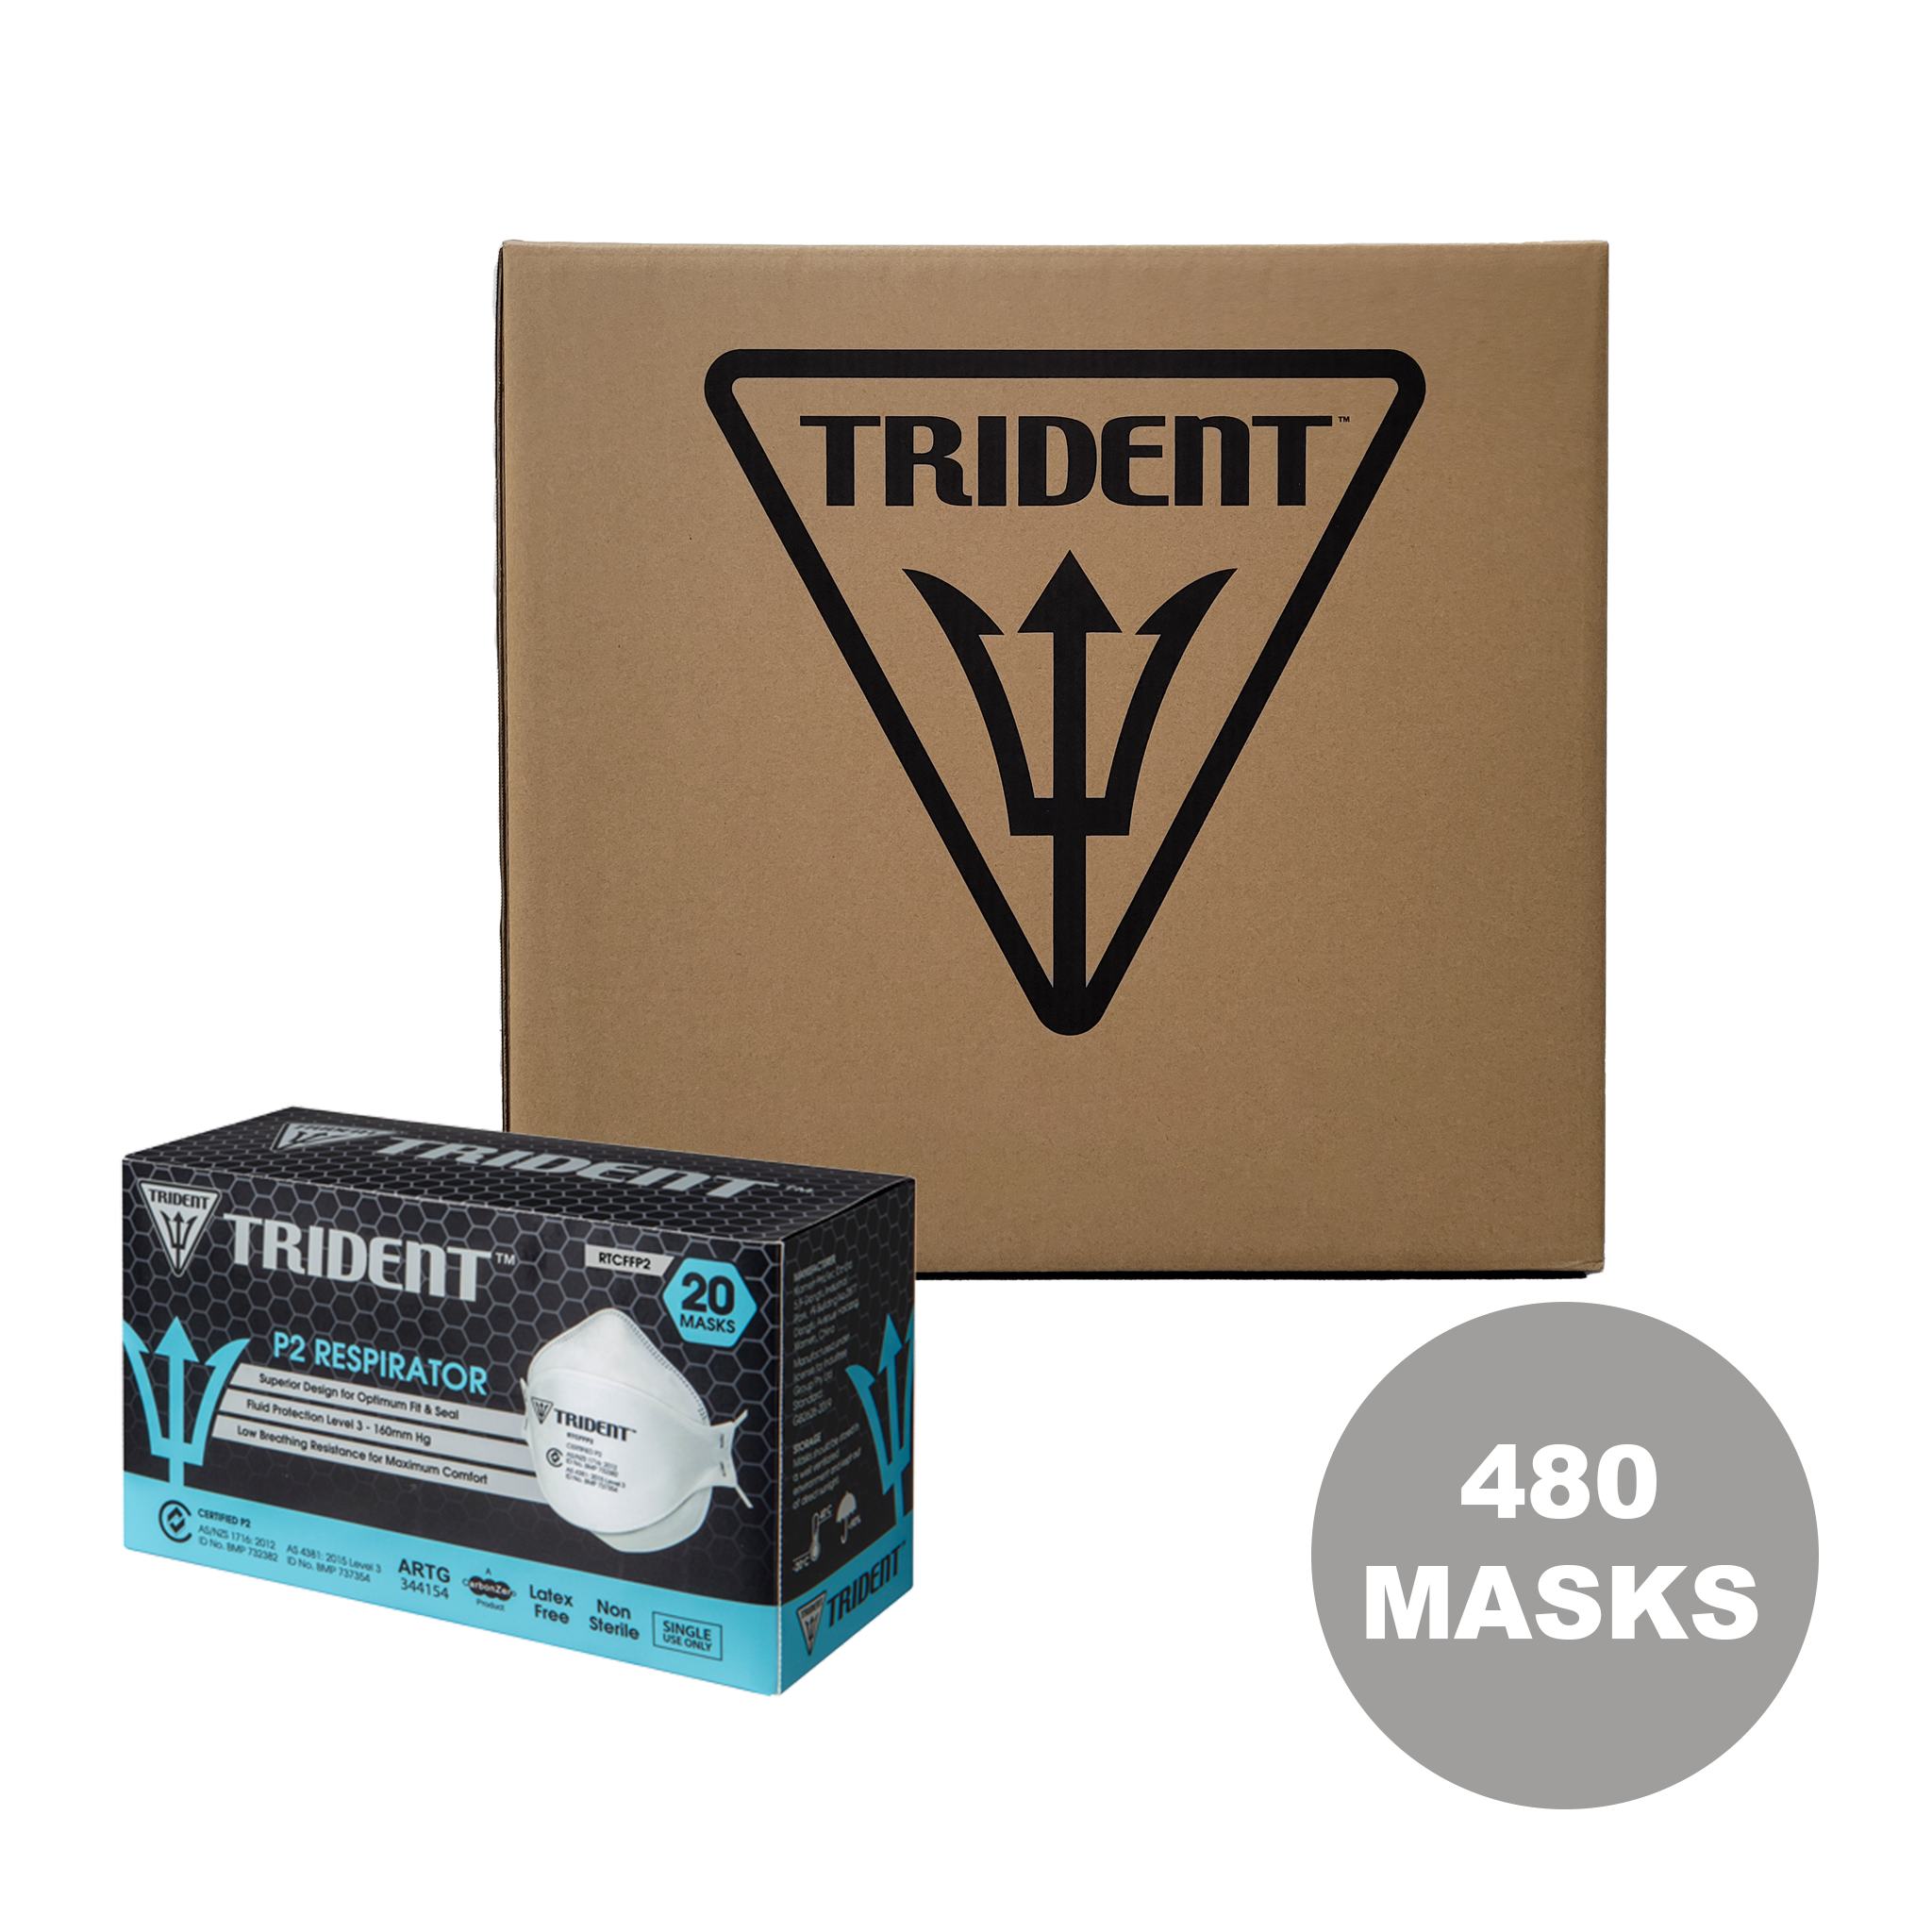 Trident® P2 Surgical Respirator | Level 3 Hospital Grade | No.1 Fit Tested Mask in an Independent Fit Test Study (1 Carton/480 Masks)